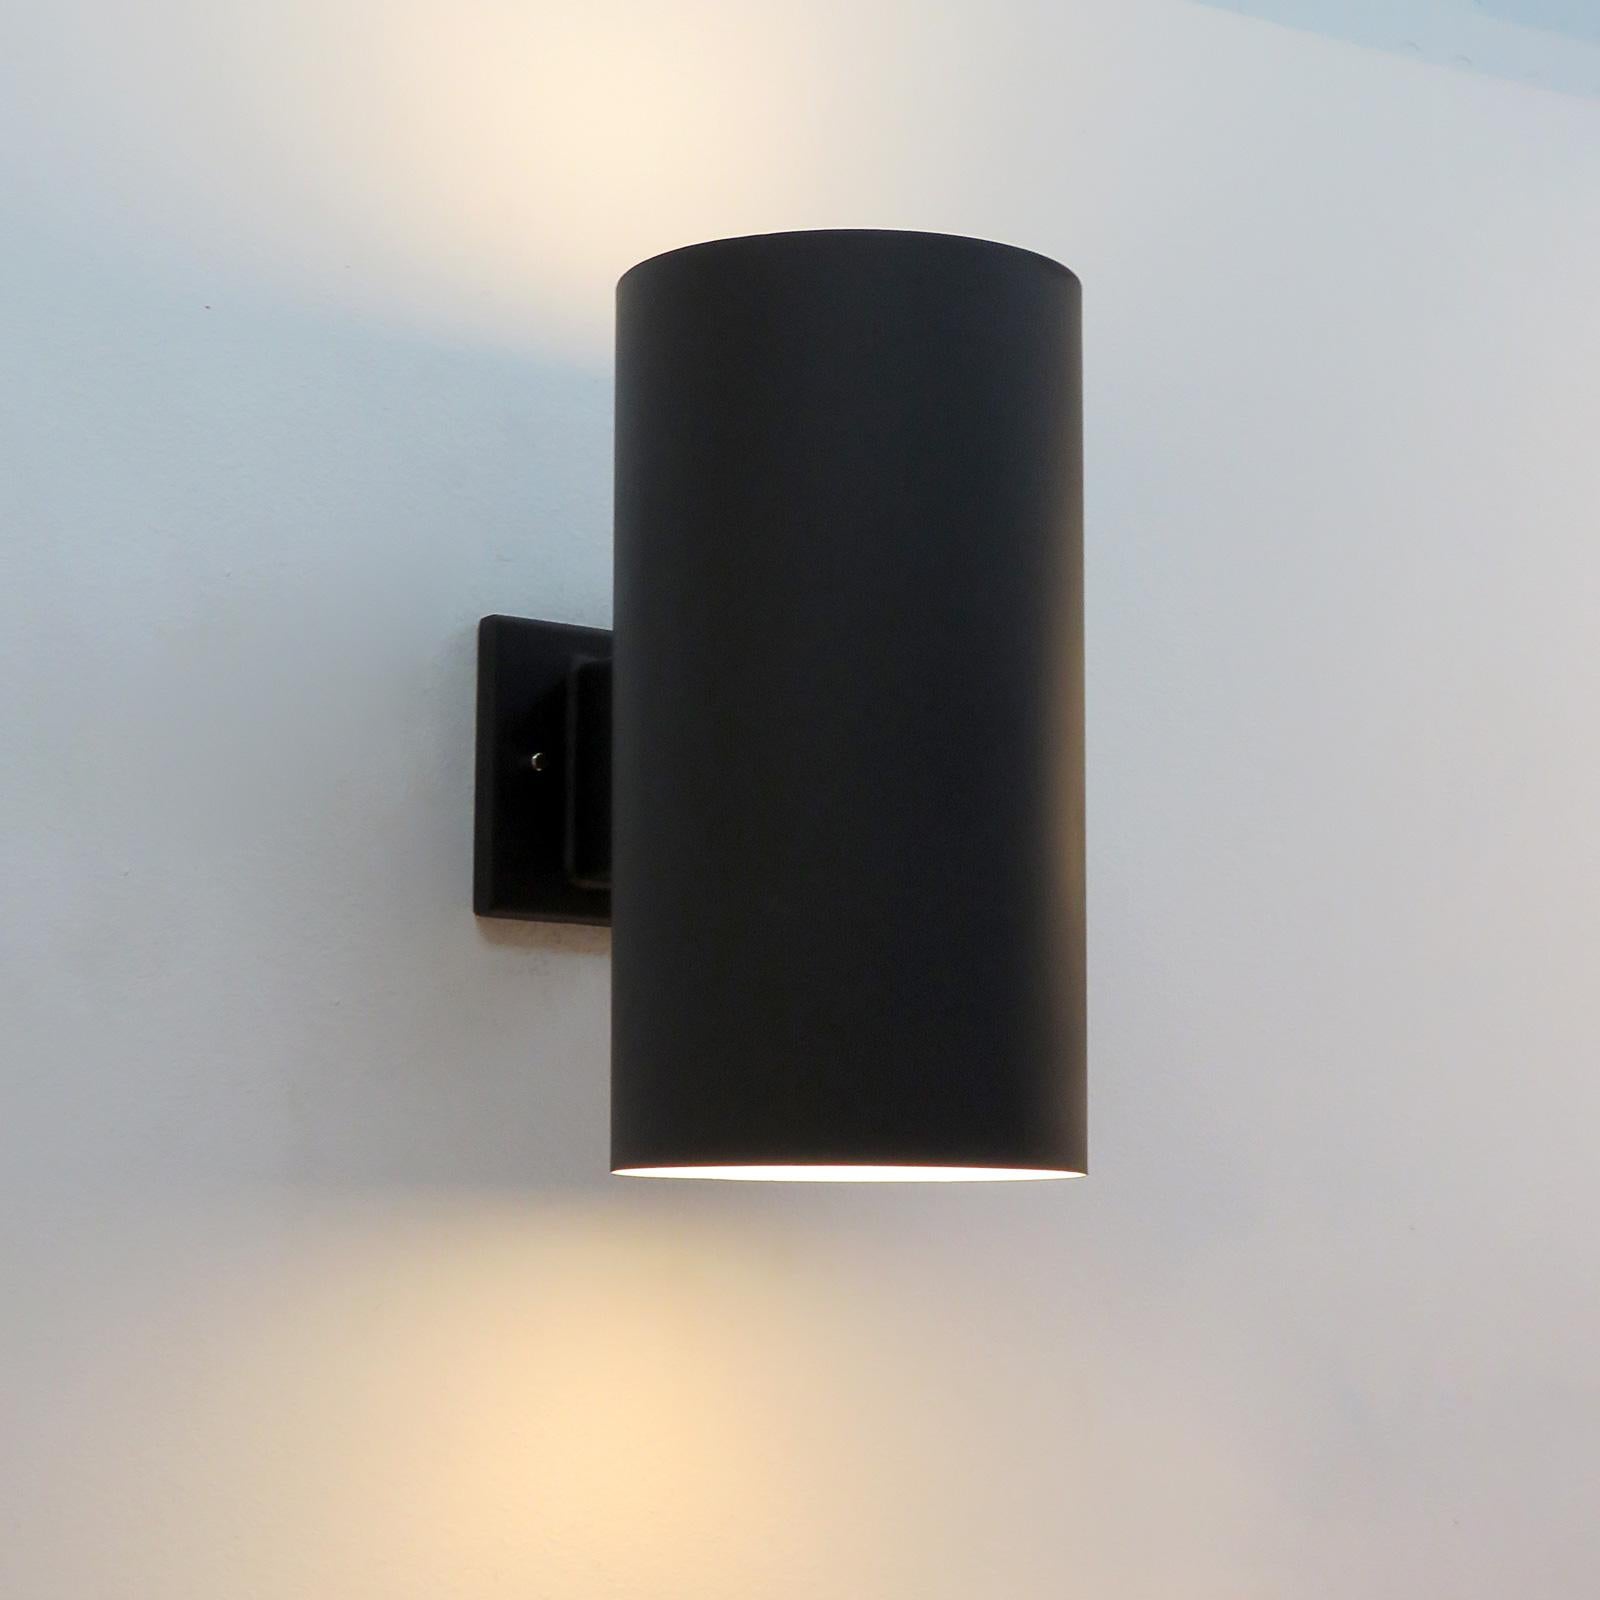 Cylinder Wall Light by Ella & John Meiling for Louis Poulsen, 1970 For Sale 1